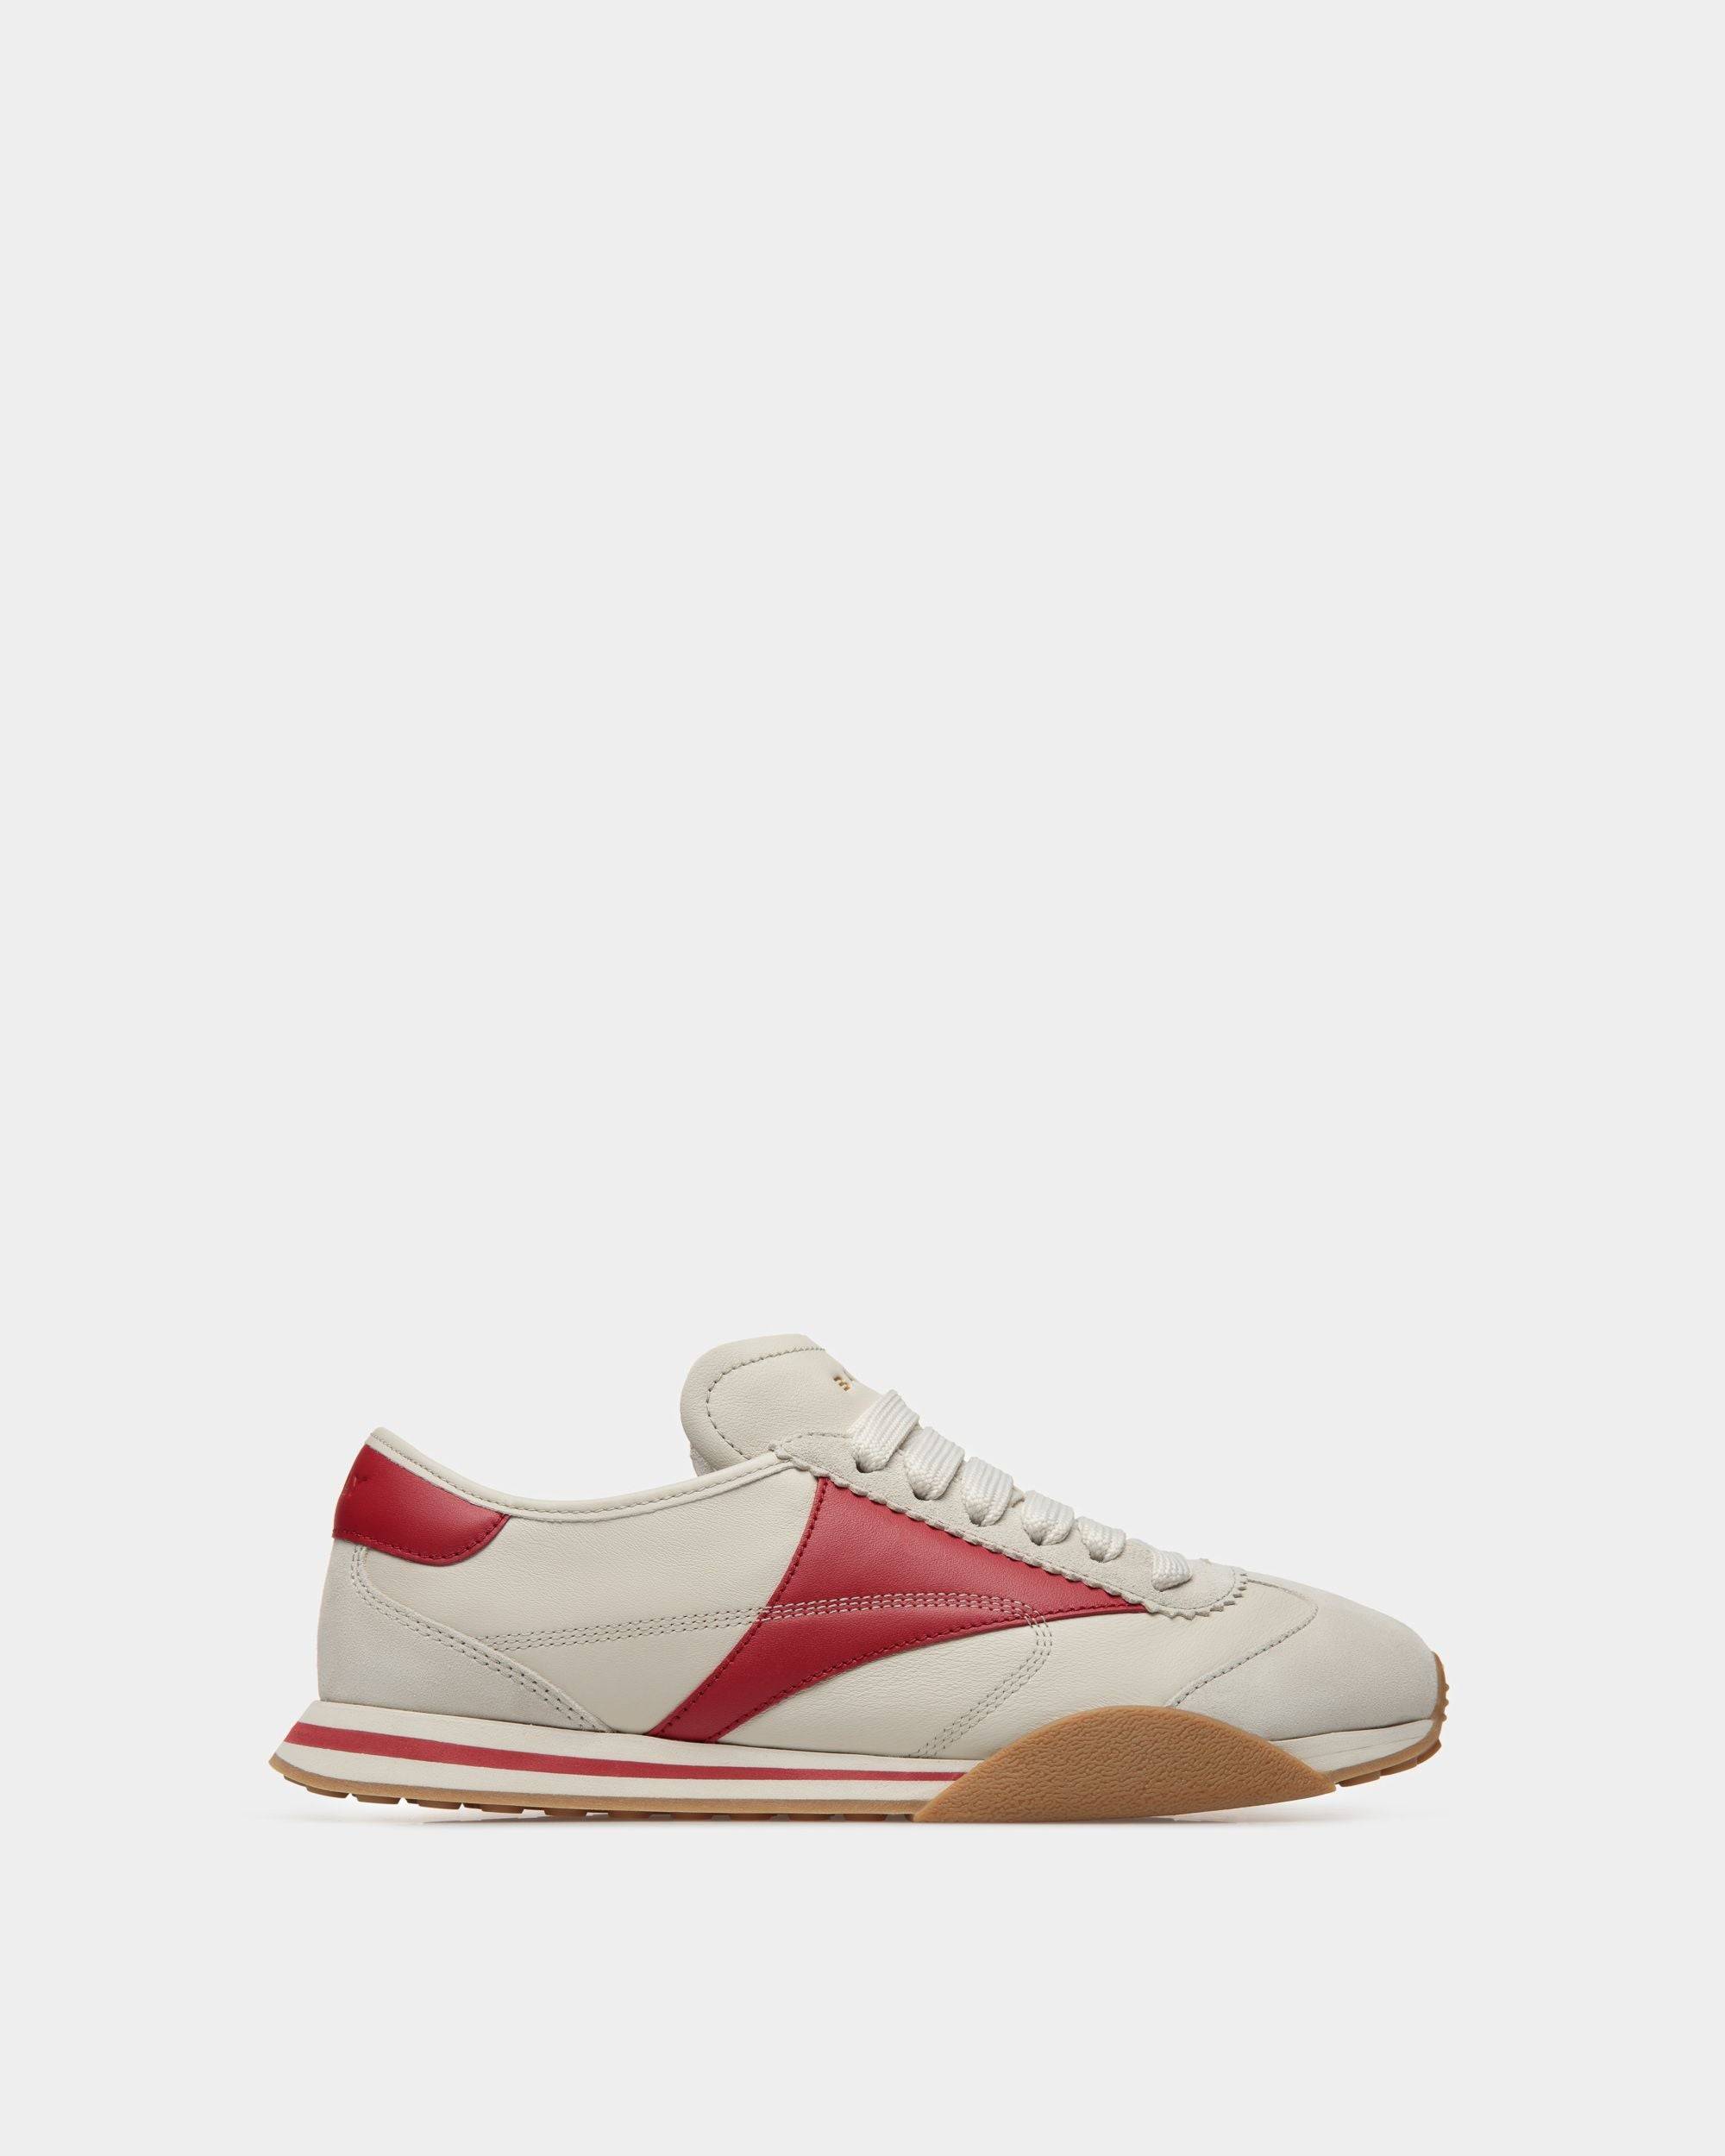 Bally Men's White Calf Leather Sneakers With Red Beige (7 D US)